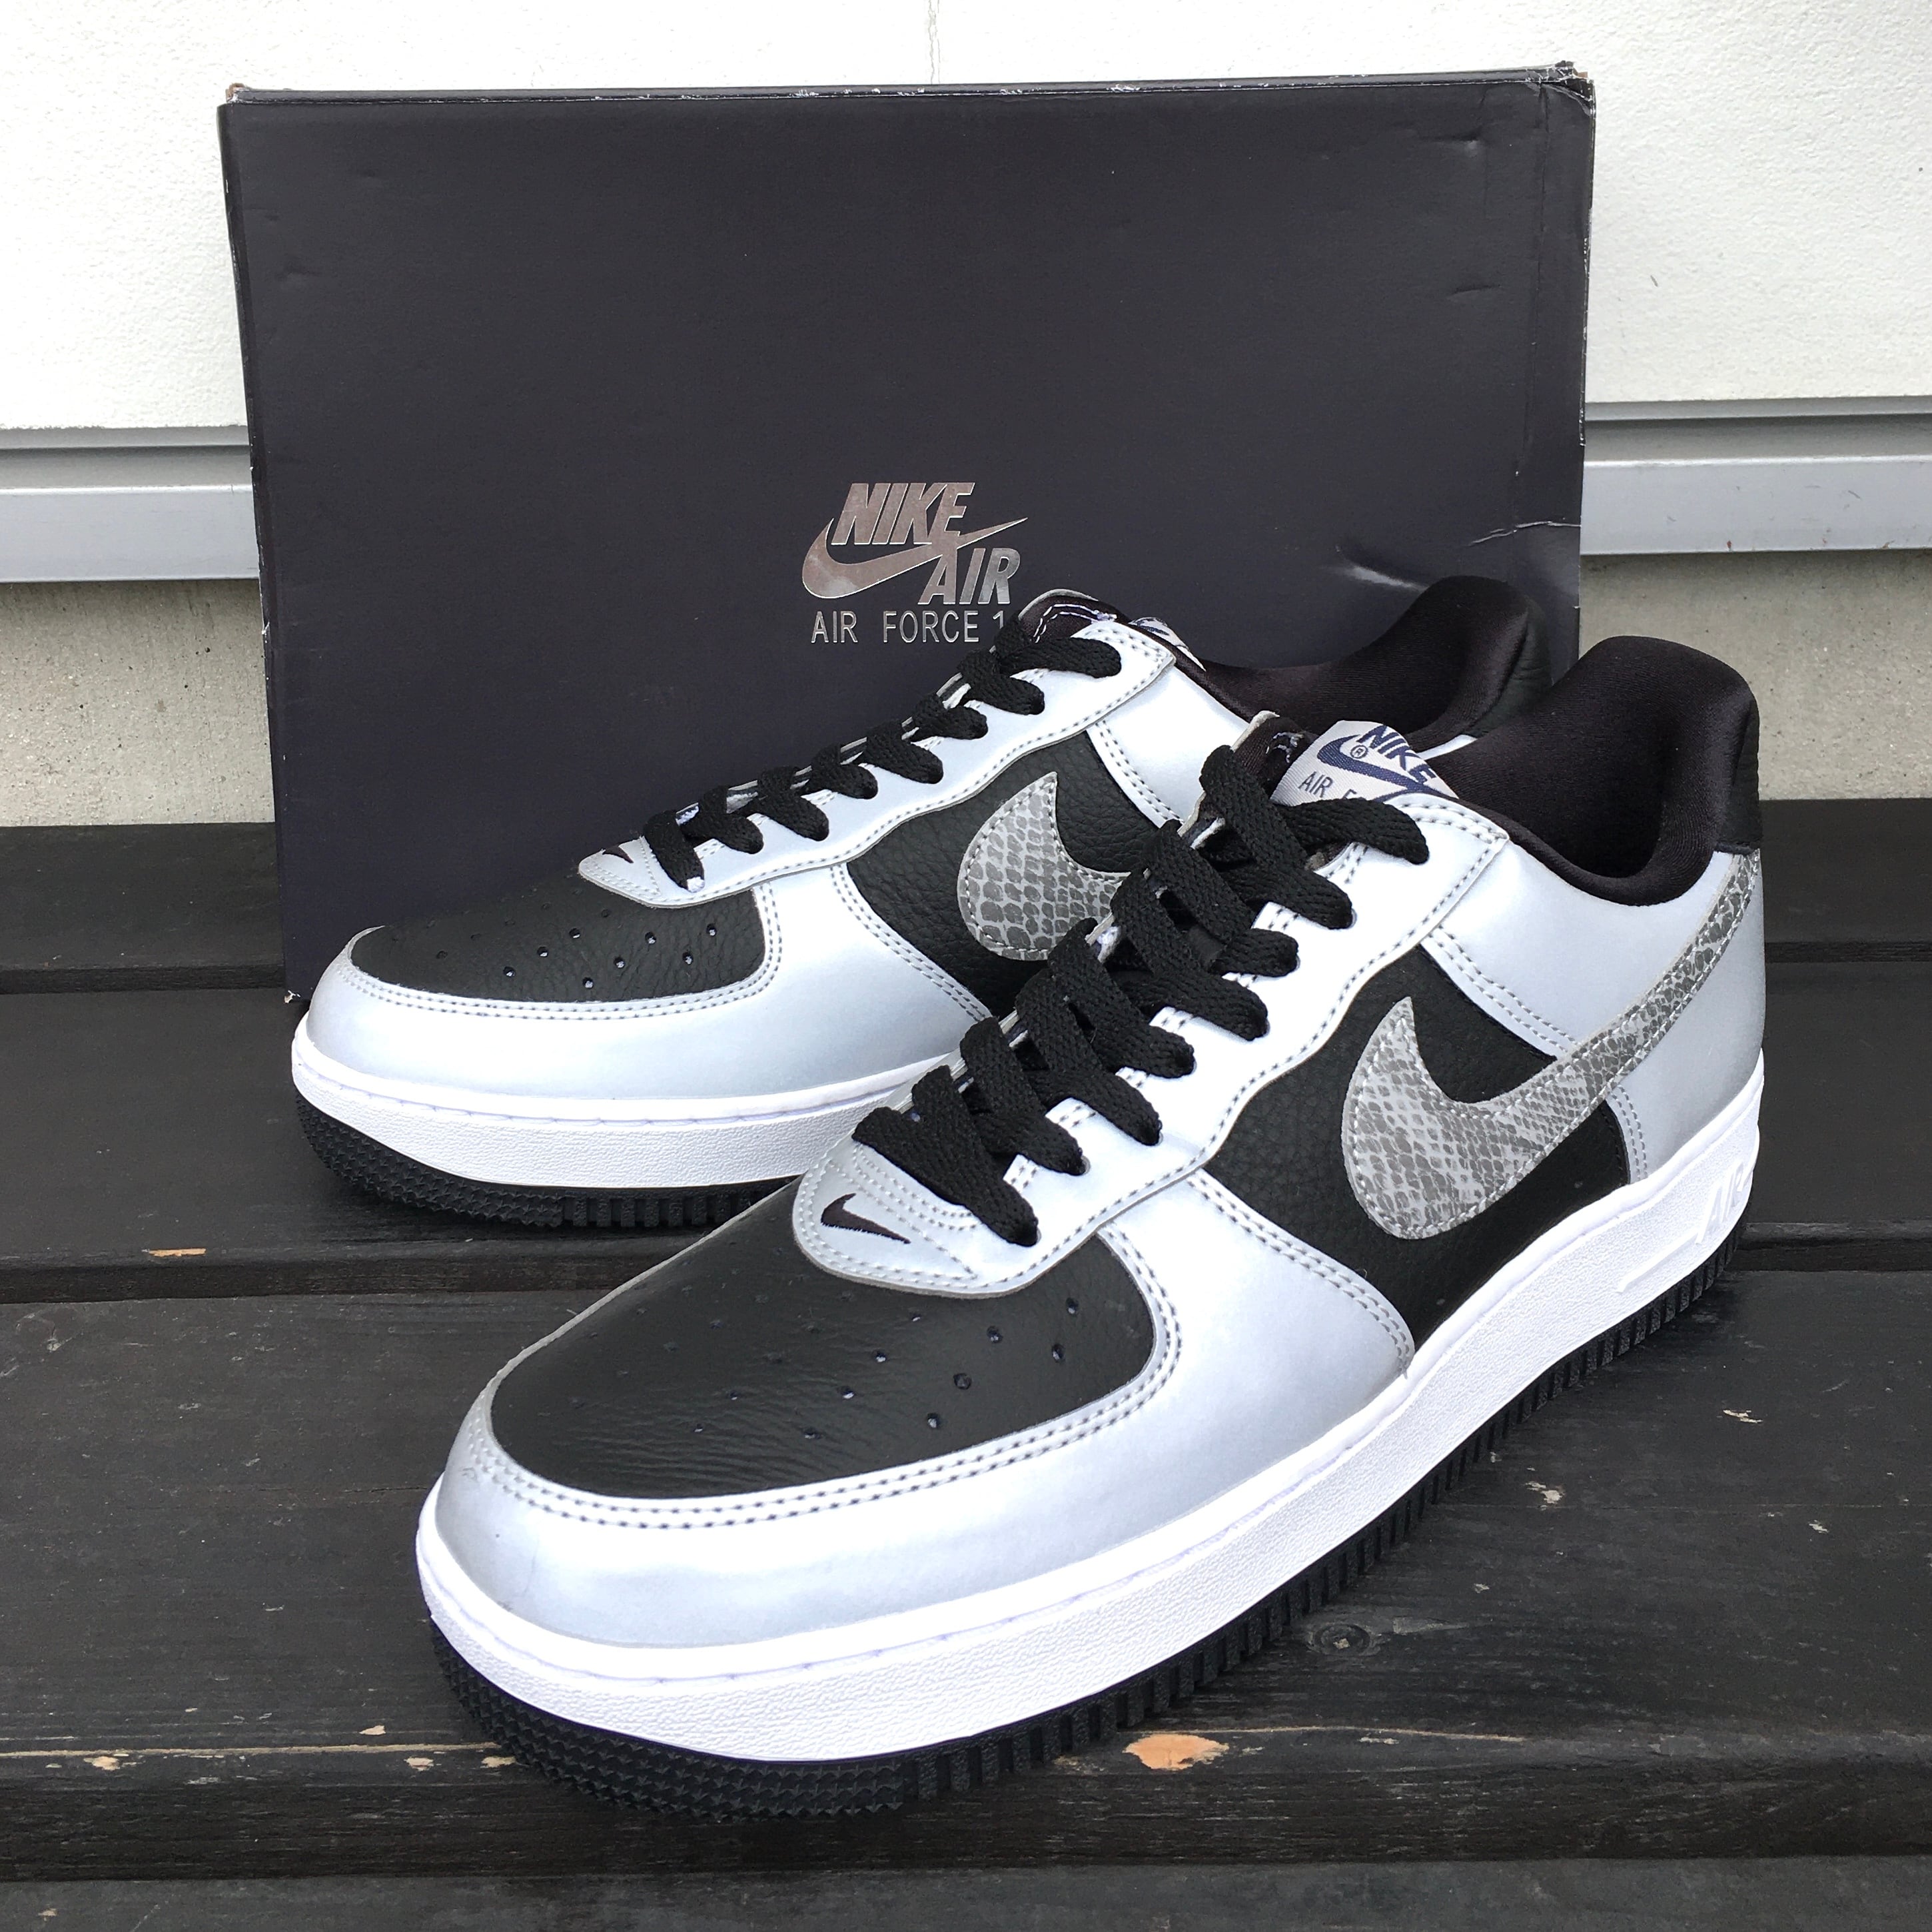 AIR FORCE1 黒蛇